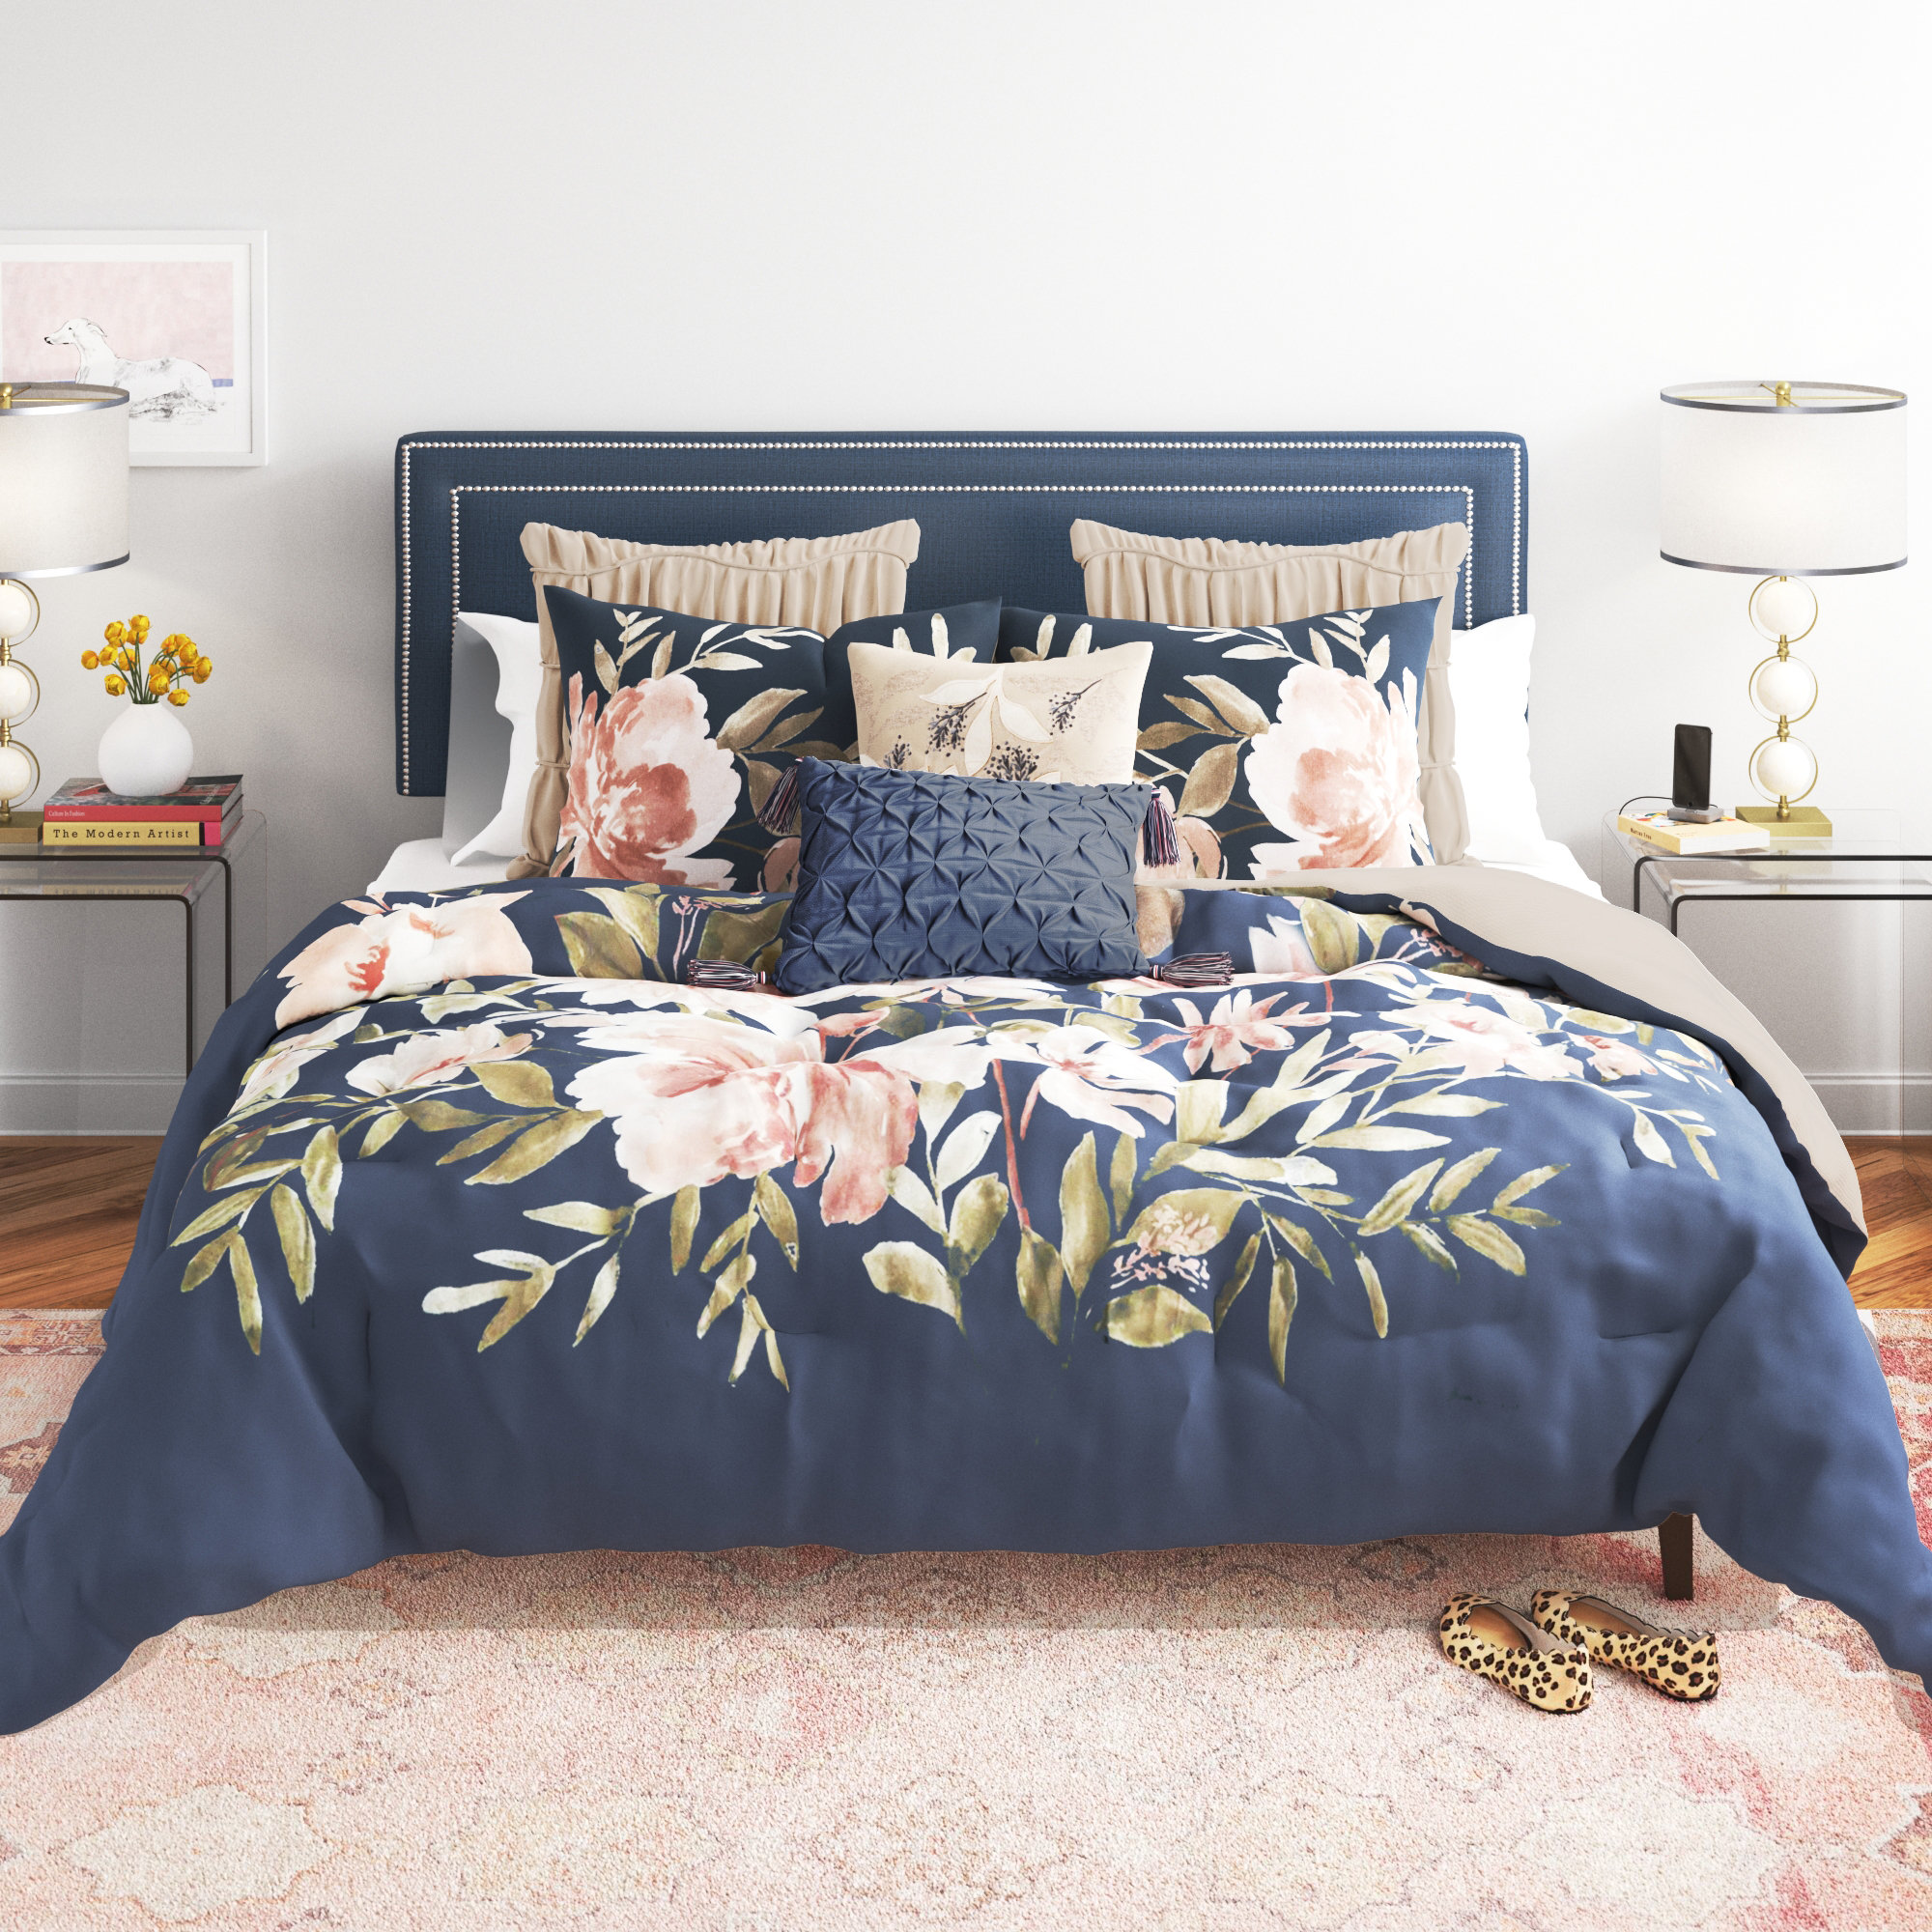 Pink And Gold Floral-Cotton Comforter Set.